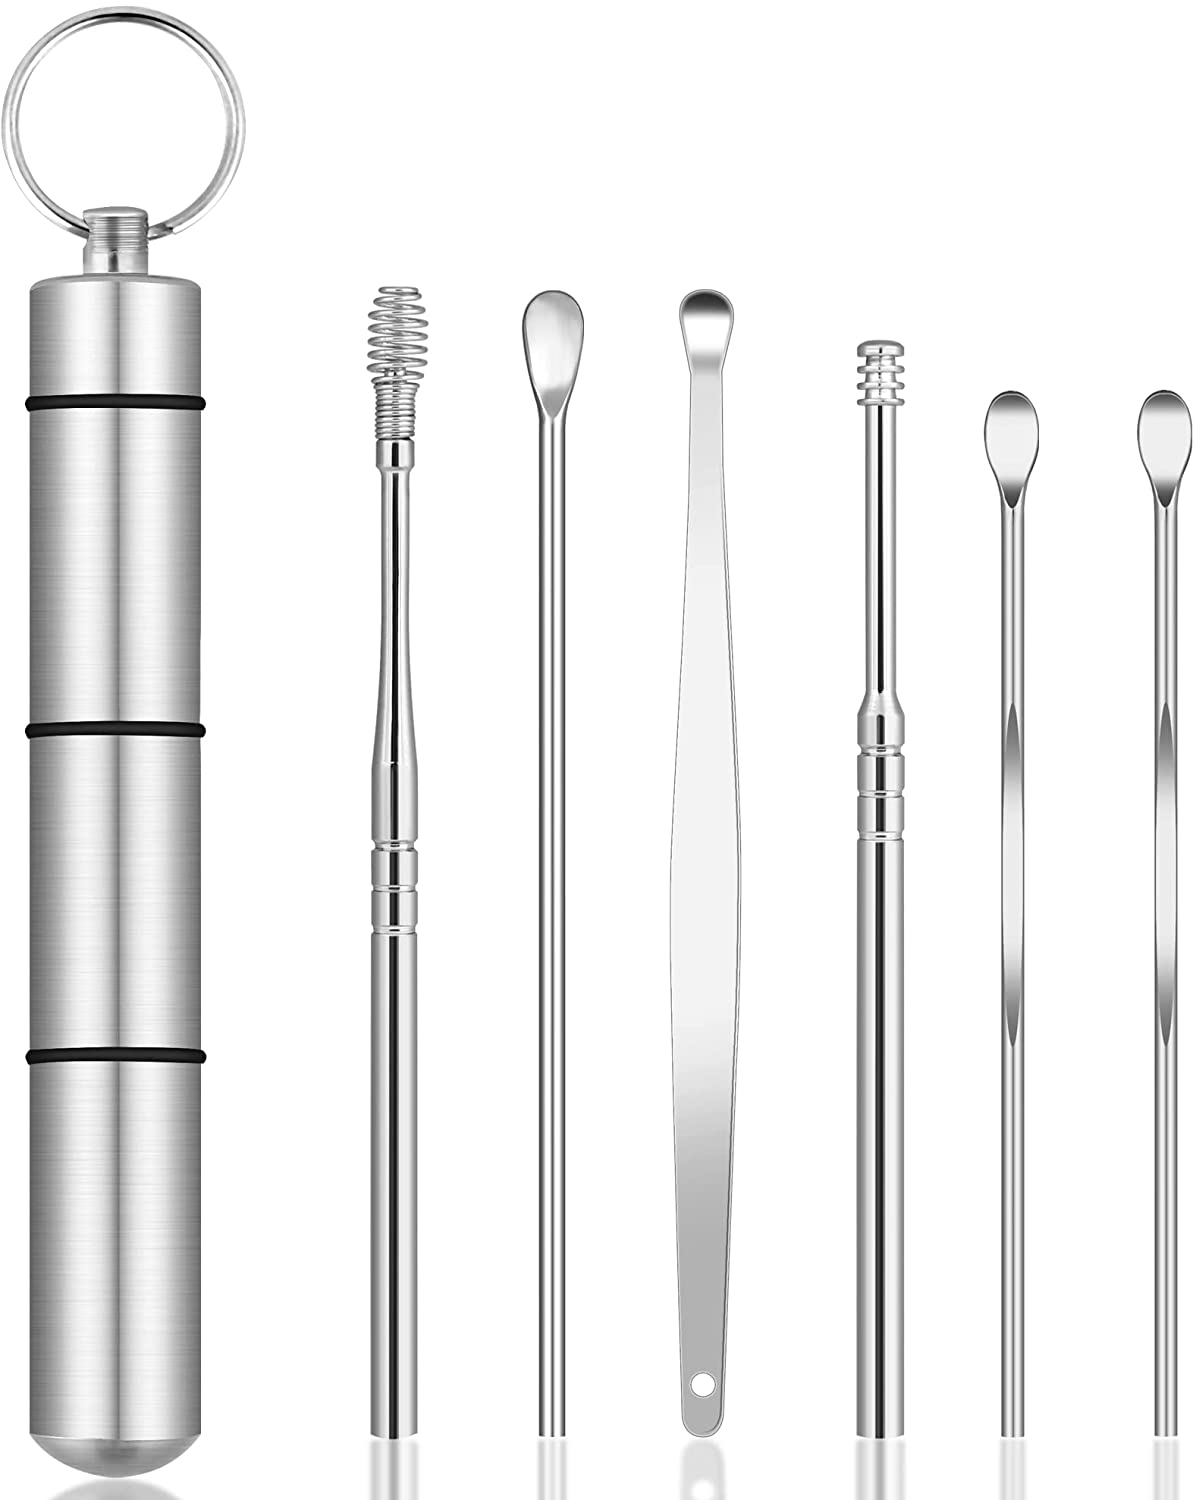 Ear Wax Removal Kit, Ear Pick Tools Earwax Removal 6-In-1 Ear Cleansing Tool Set Stainless Steel Ear Curette Ear Wax Remover Tool with Keychain Box(Rose Gold)